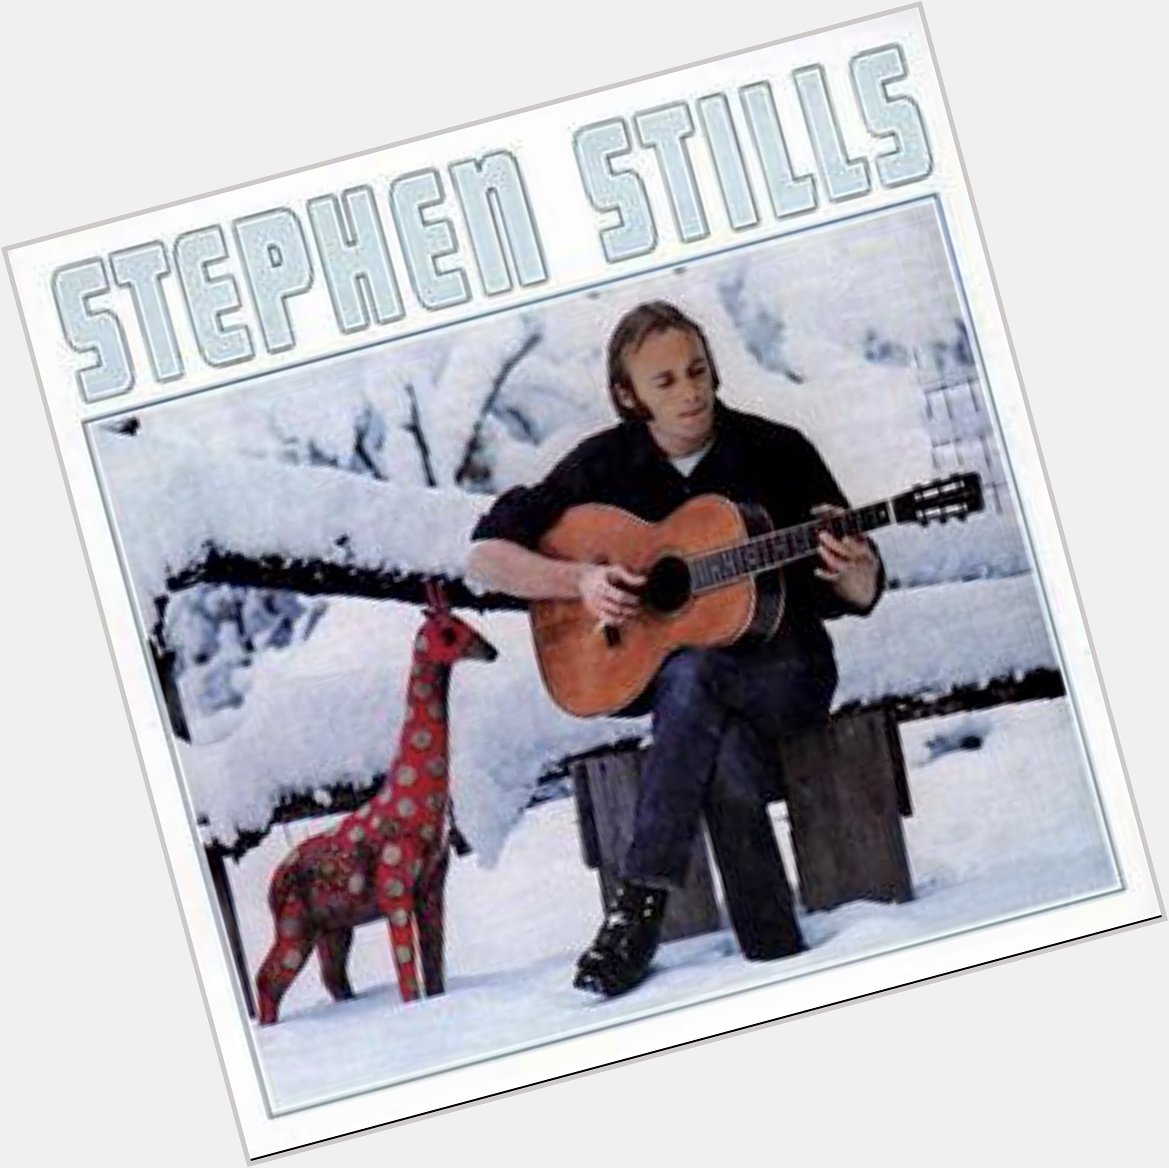 Happy  Birthday to the Great Stephen Stills who turns 77 today   